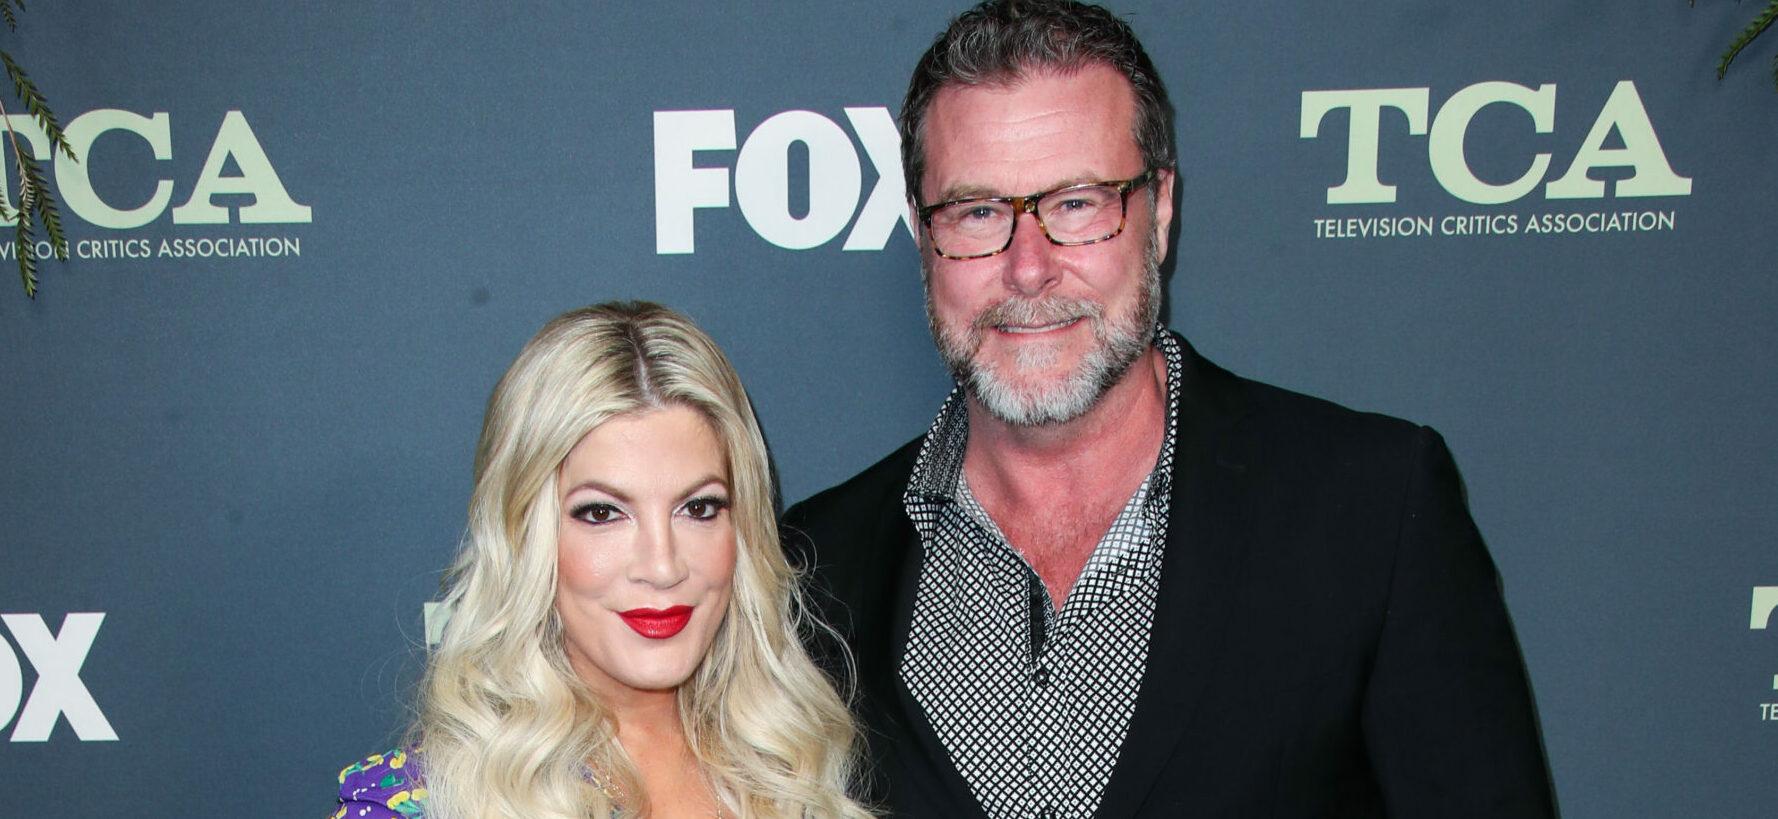 Tori Spelling Addresses Motel Living Situation With Her Kids Amid Marital Issues With Dean McDermott